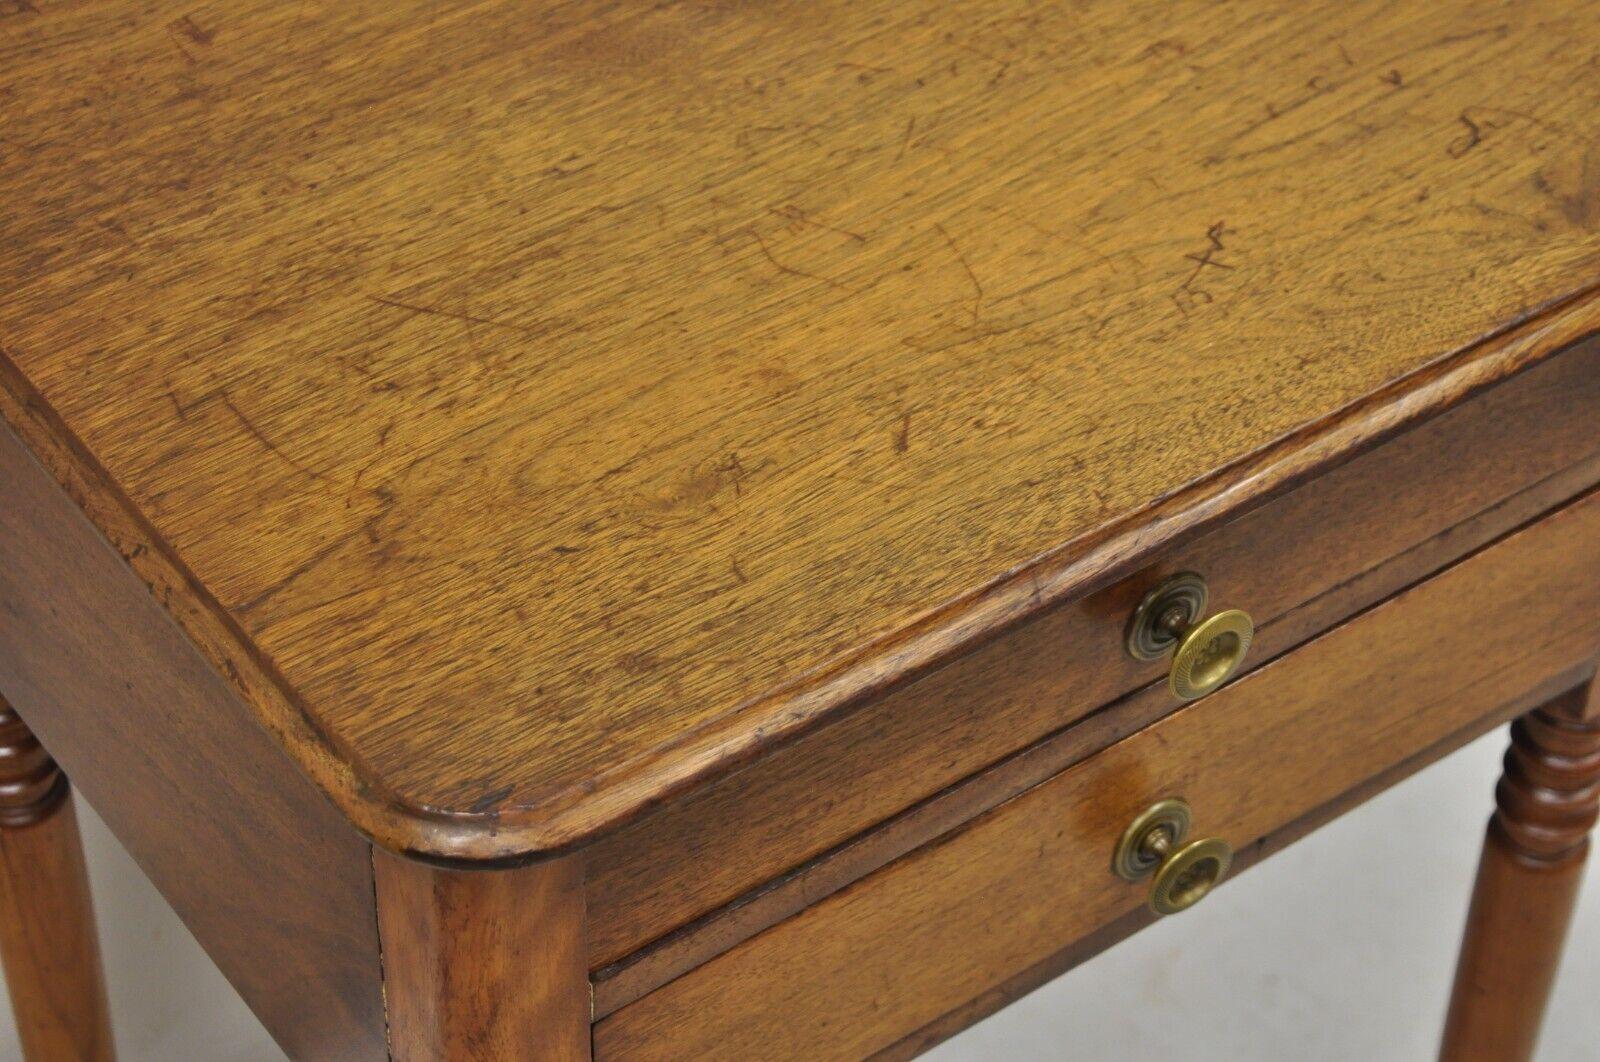 19th Century Antique American Colonial Sheraton Mahogany 2 Drawer Nightstand Bedside Table For Sale